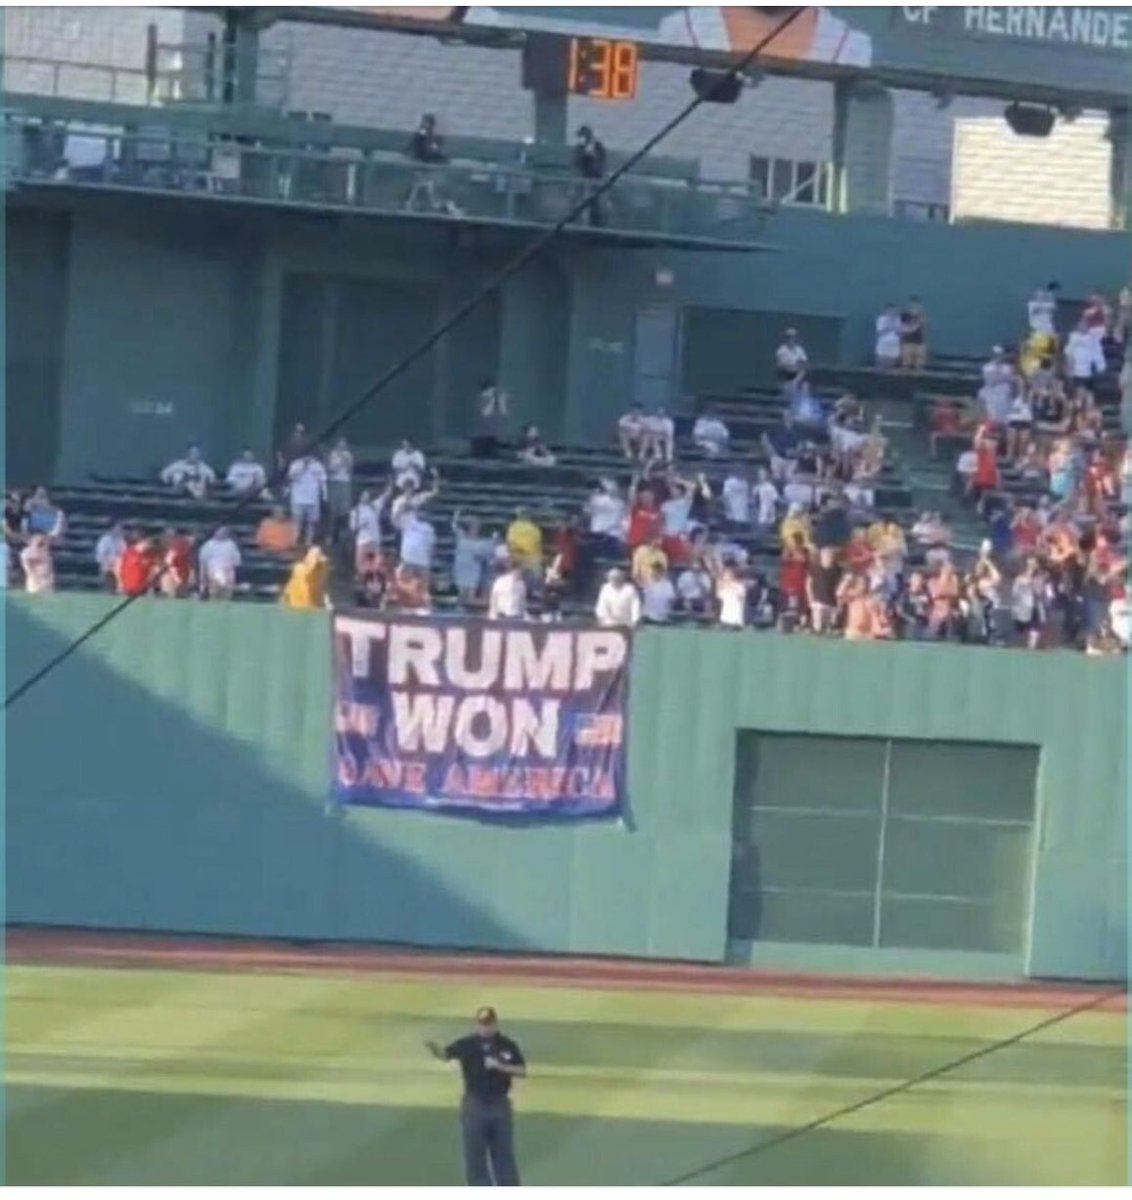 First #NY #YankeeStadium and now #Boston #Fenway 
#AmericaKnows #TruthMatters #TrumpWon #WhosUpNext 🤔